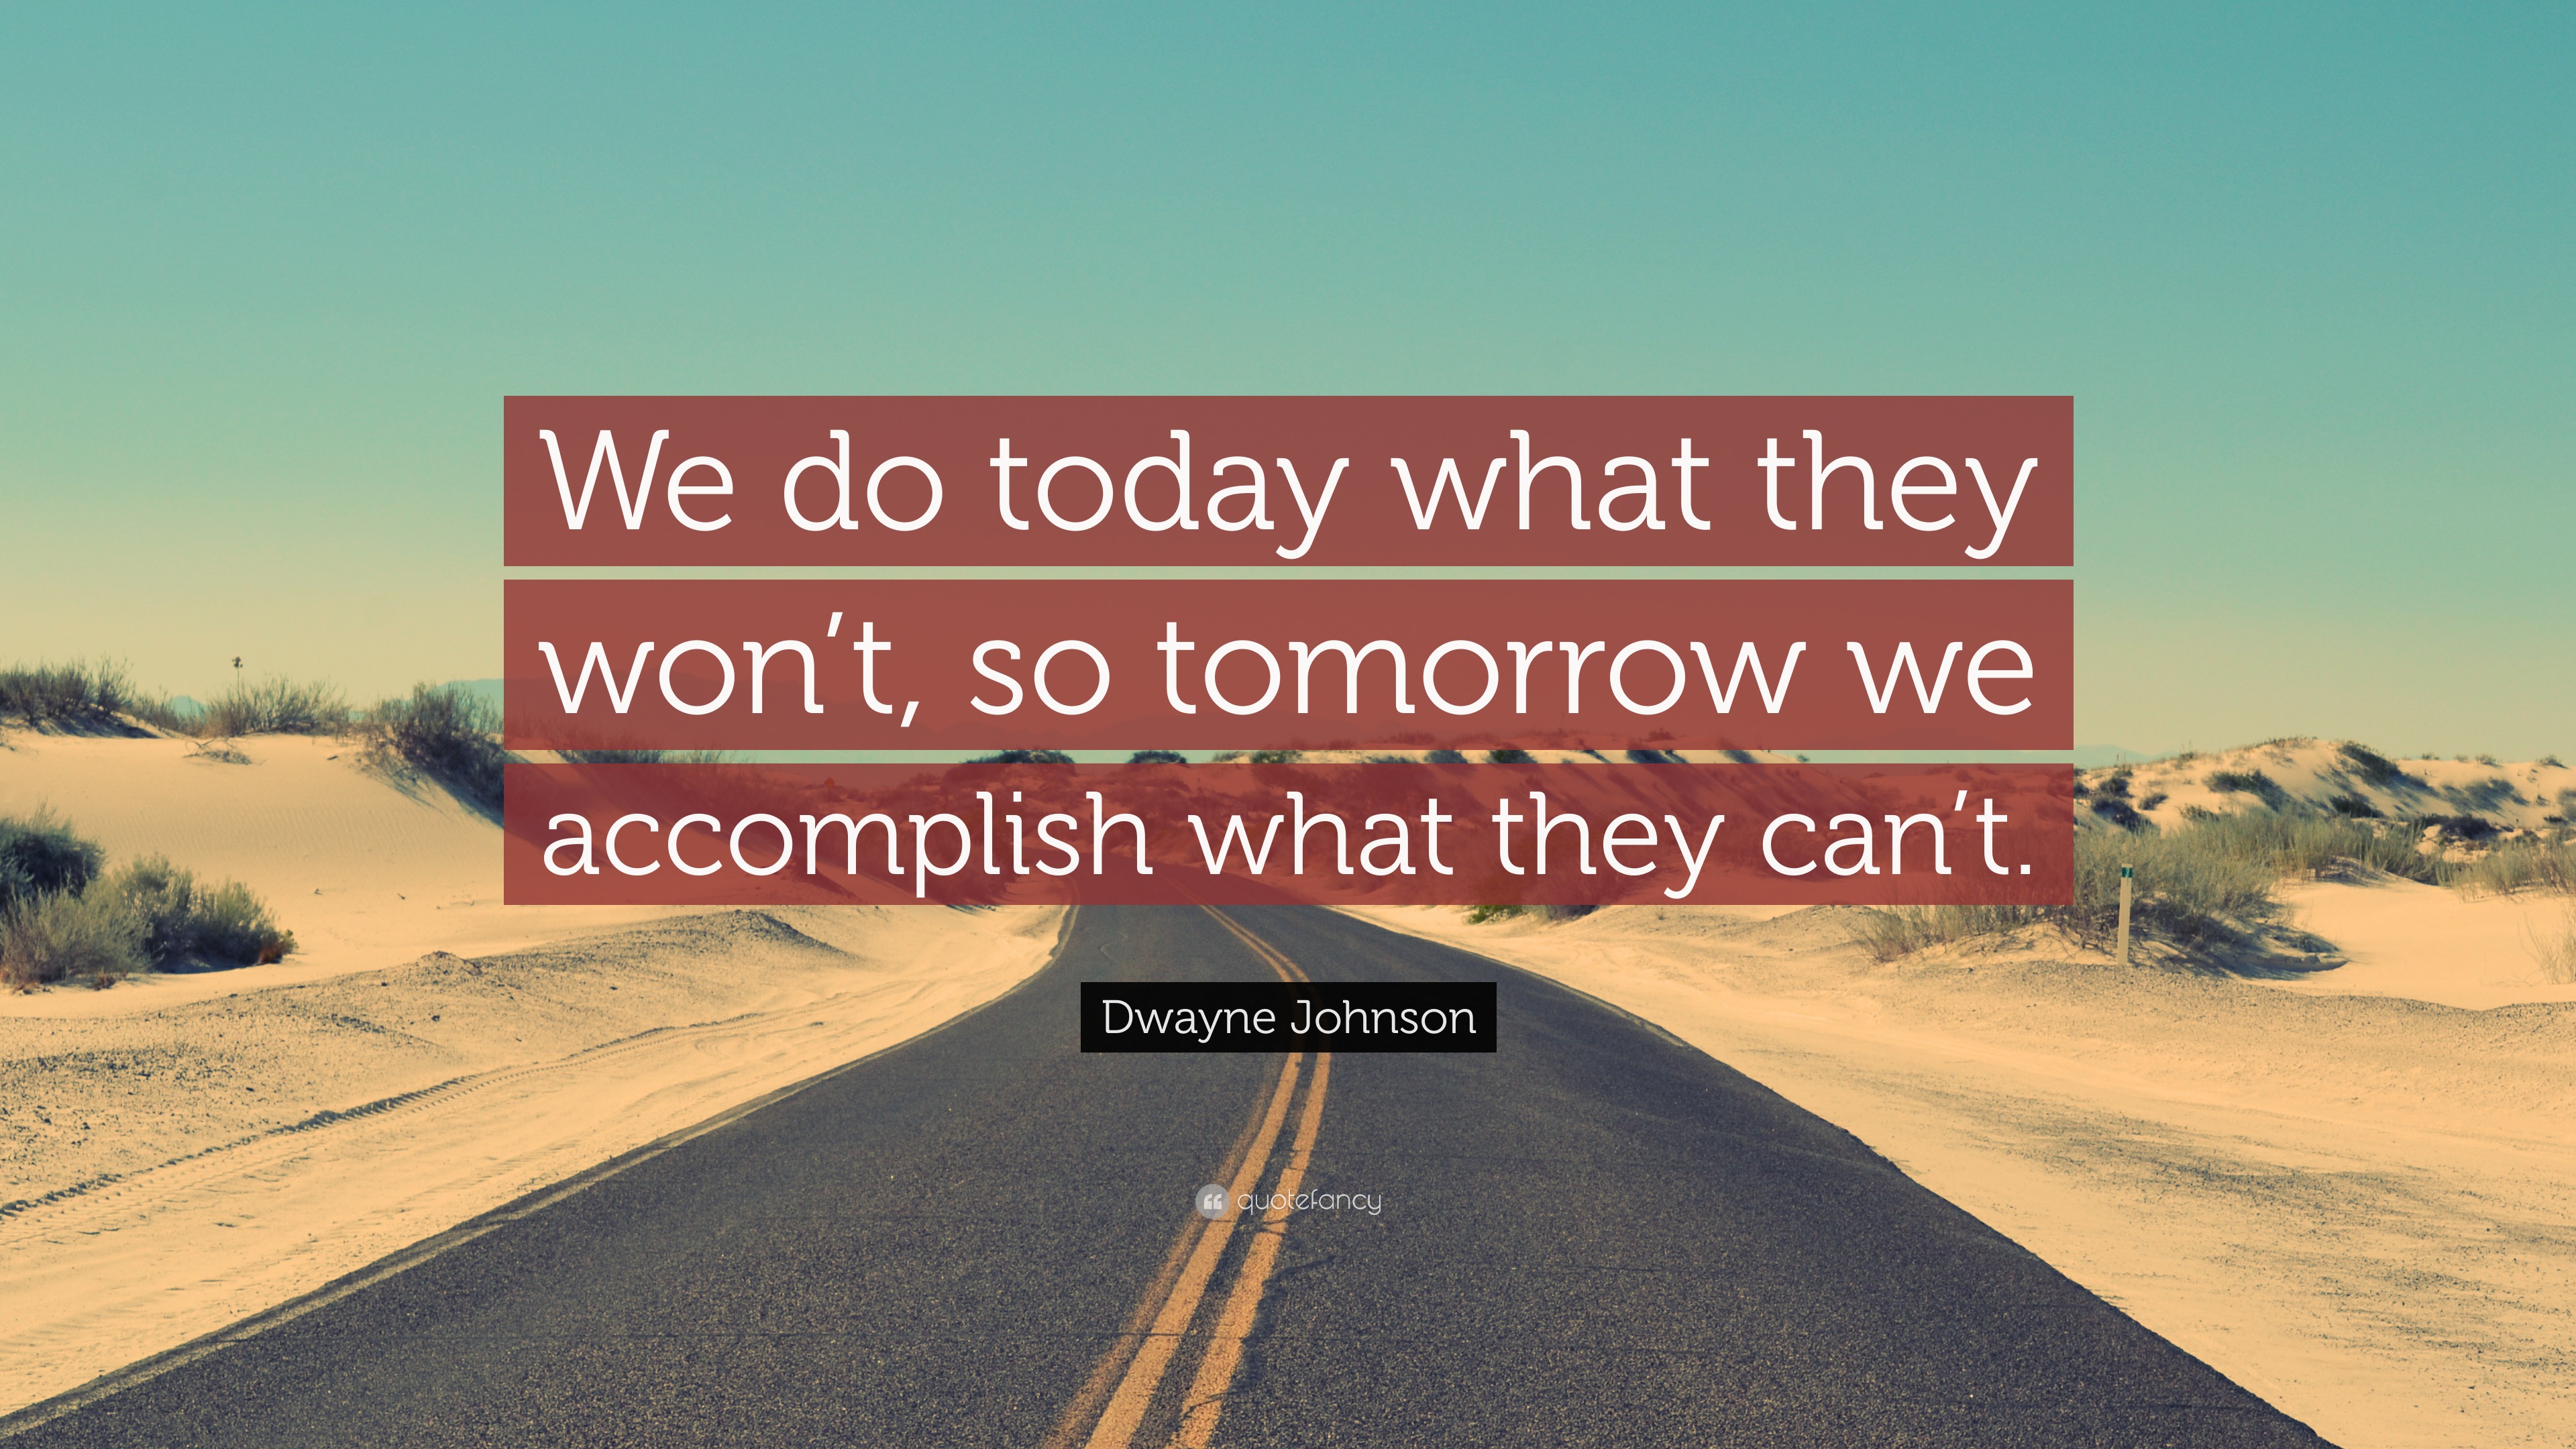 Dwayne Johnson Quote: “We do today what they won’t, so tomorrow we ...